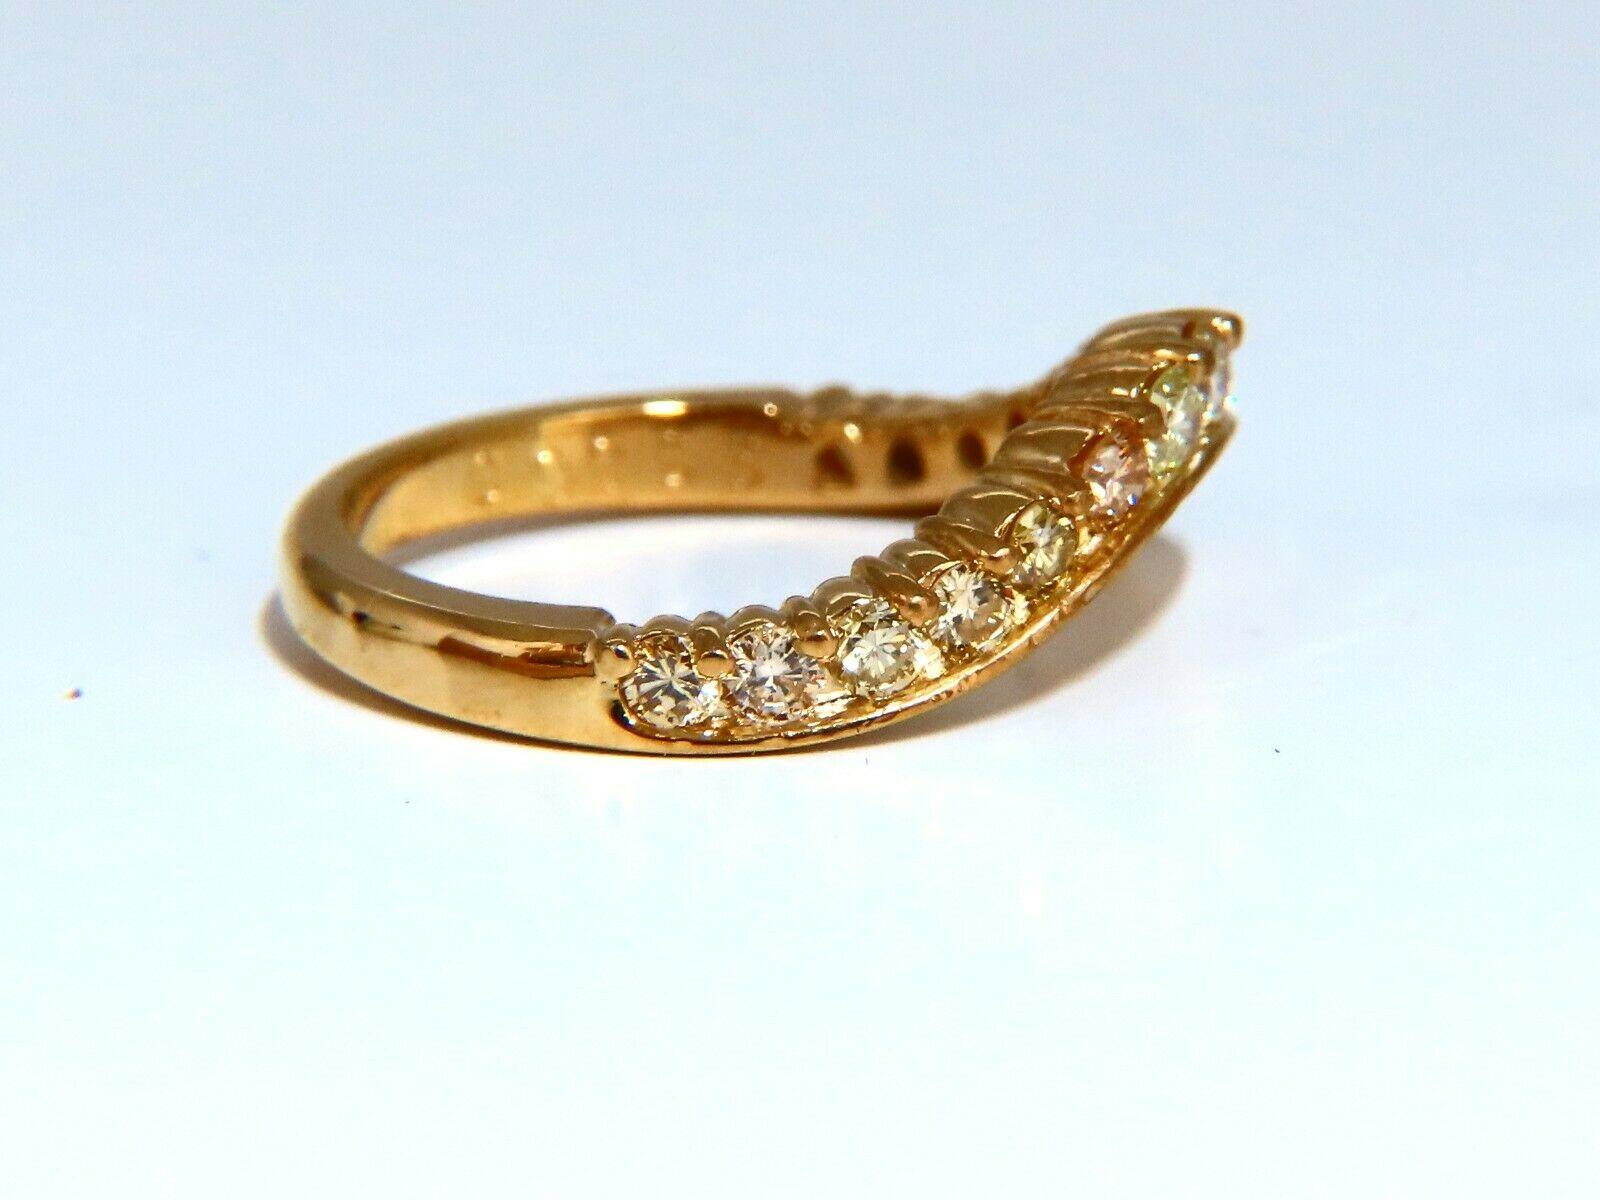 Fancy Diamonds Wave Band

.60ct. Natural Fancy Shades of Yellow Diamonds 

 Round cut brilliant diamonds

Durable Built.

Vs-2 Si-1 clarity H color.

14kt yellow gold.

3.6 Grams

Overall ring: 2.3mm wide

Depth: 3.4mm

Current ring size: 4.75

May